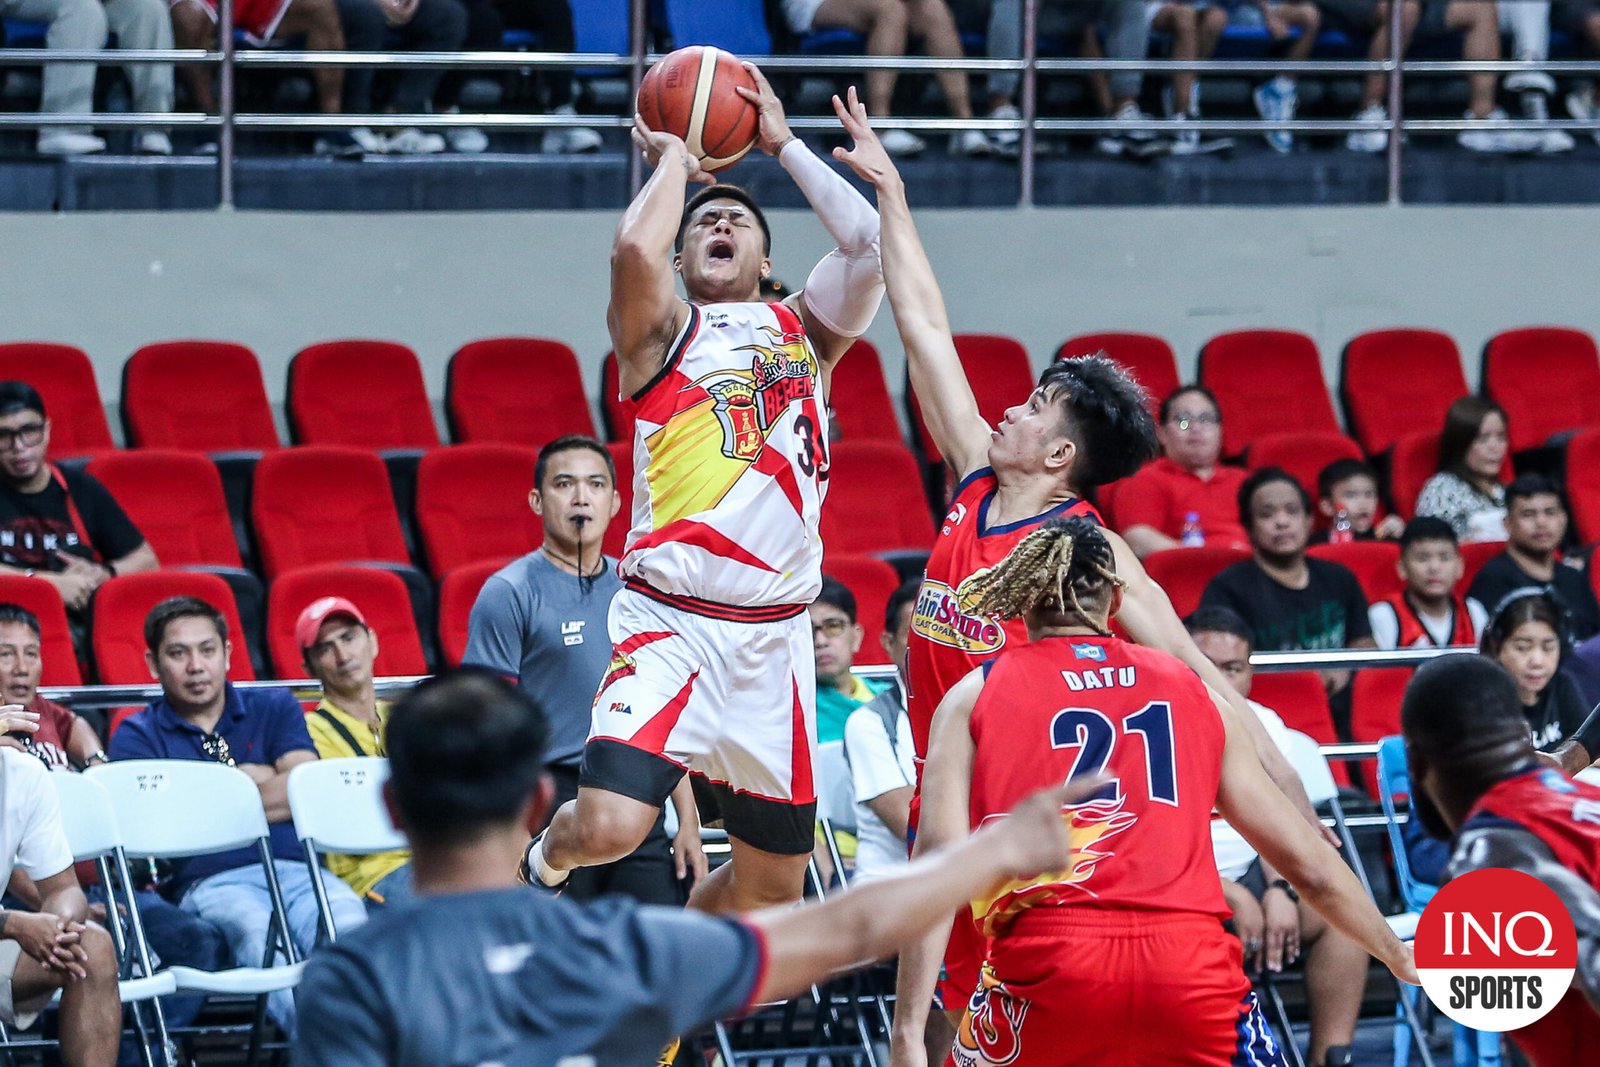 San Miguel flexes might and ousts Rain or Shine